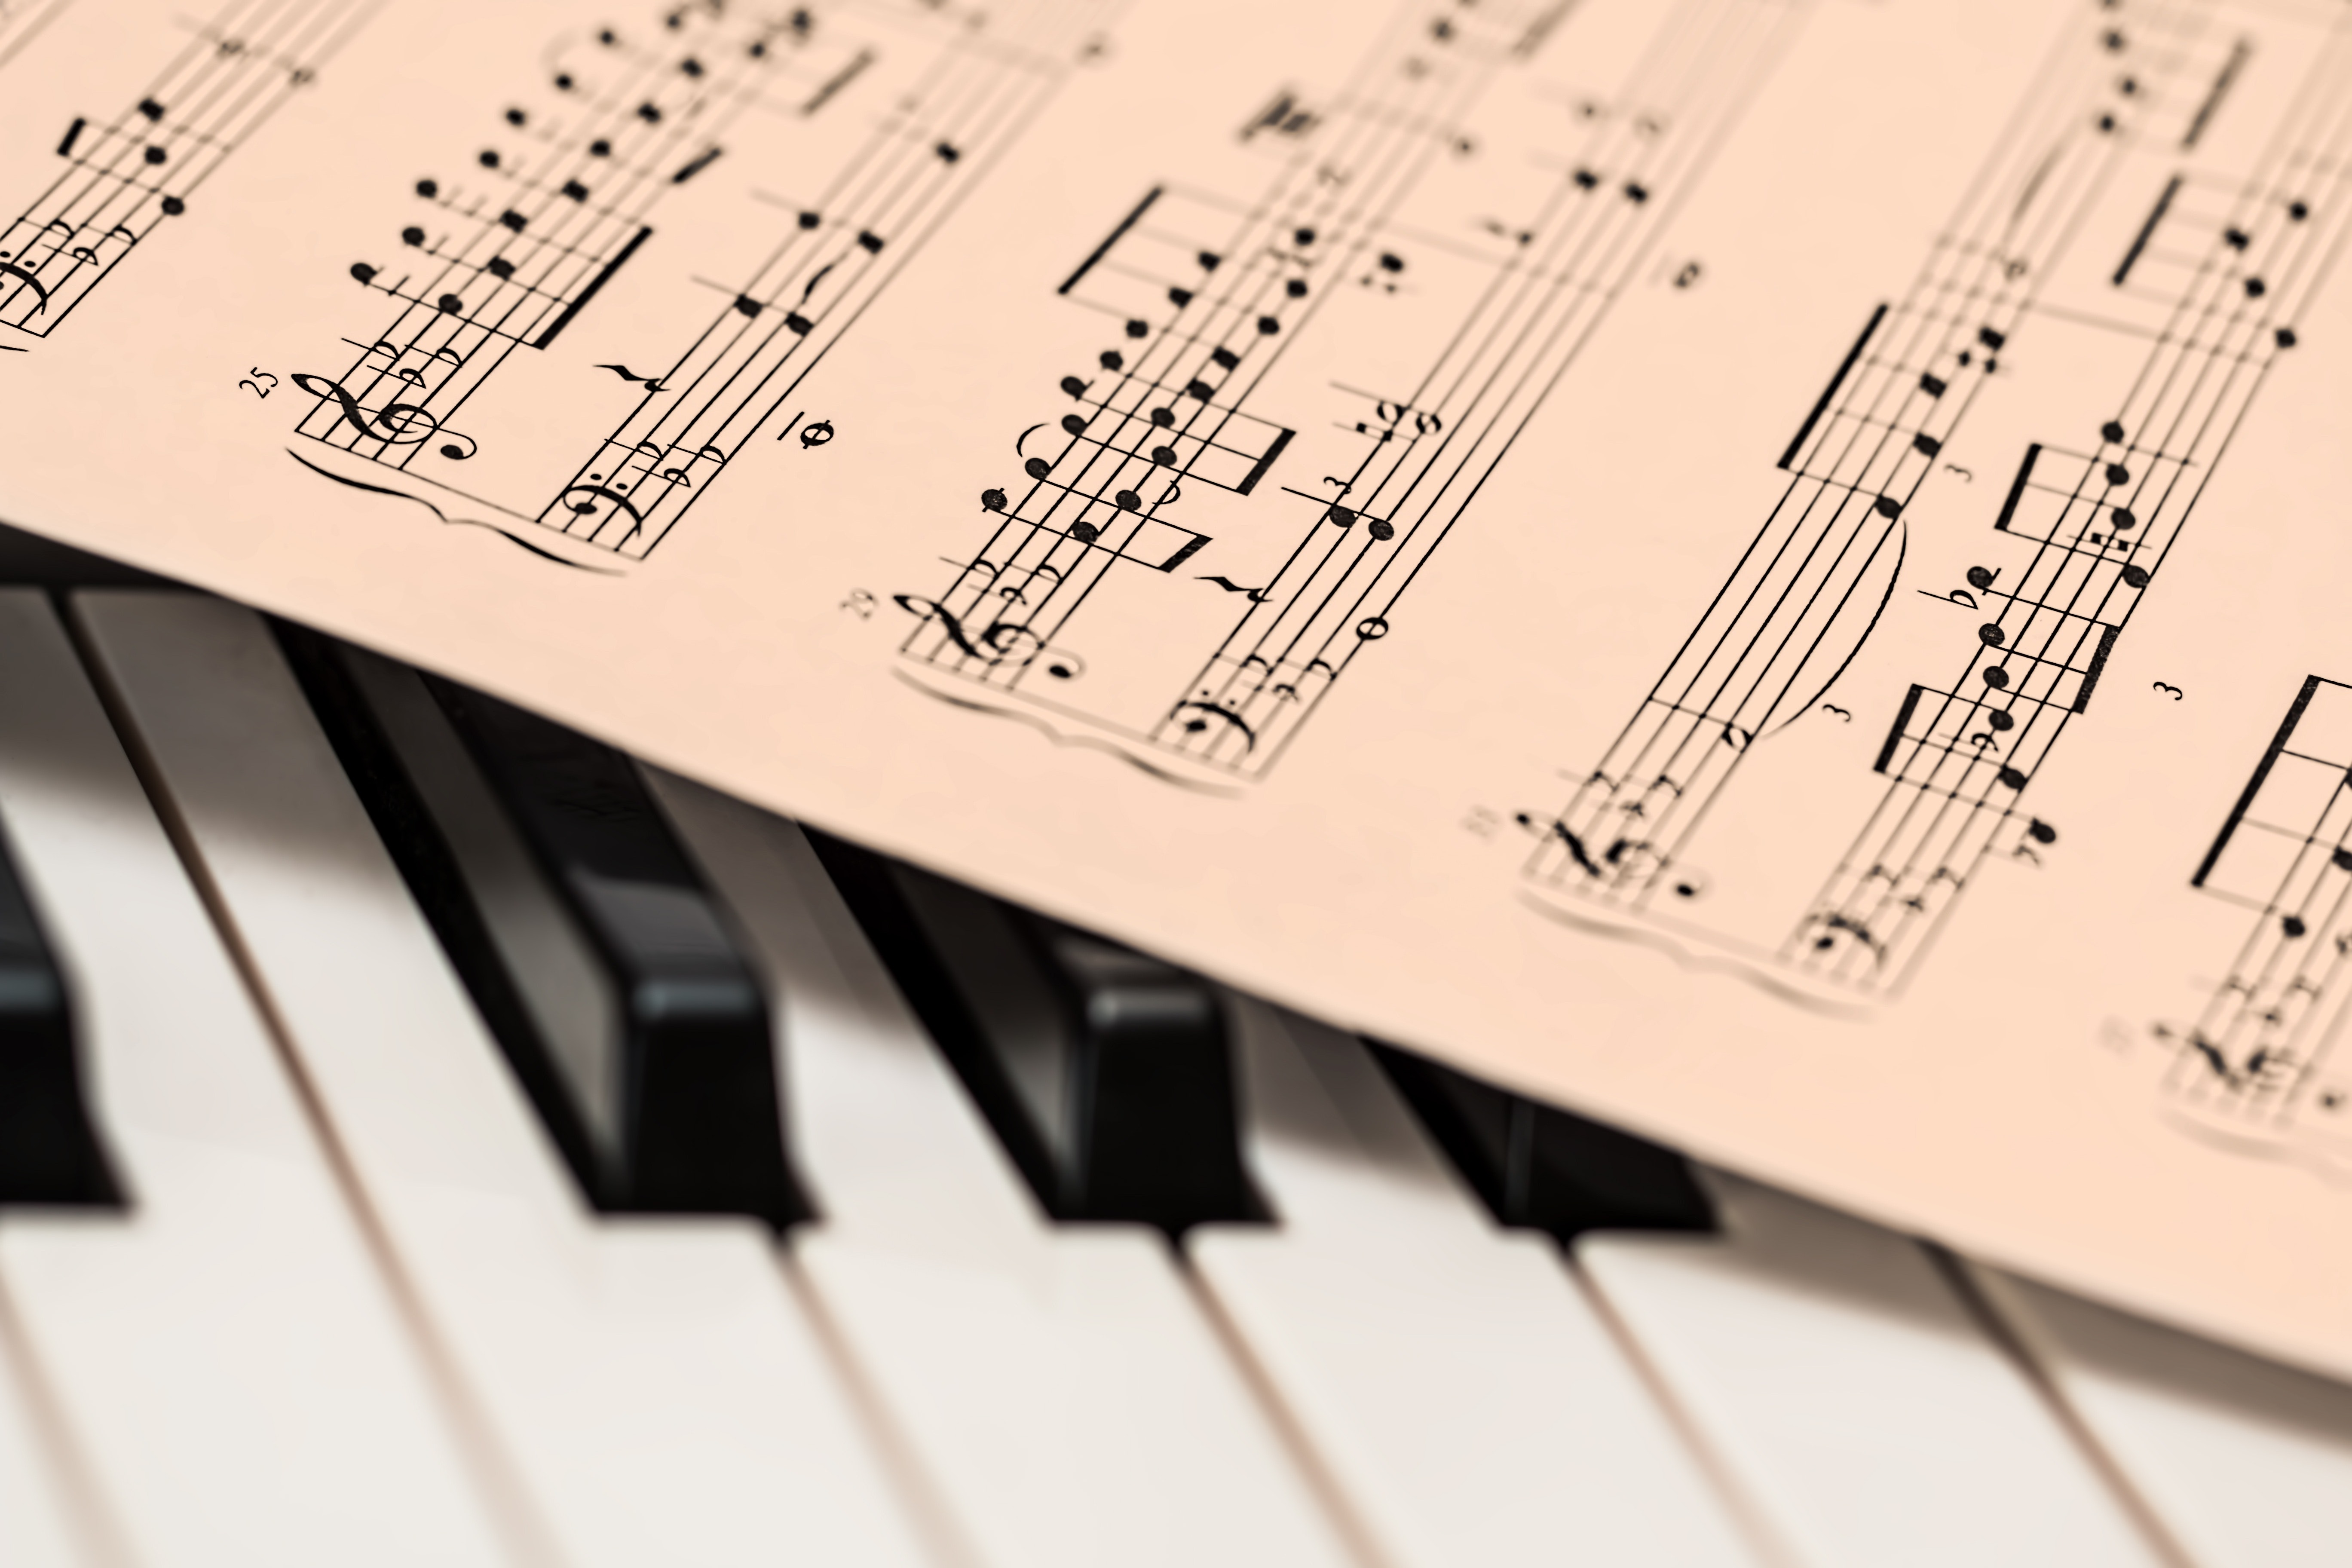 image of piano keys with an old piece of sheet music on top, probably a classical composer like Bach or Mozart